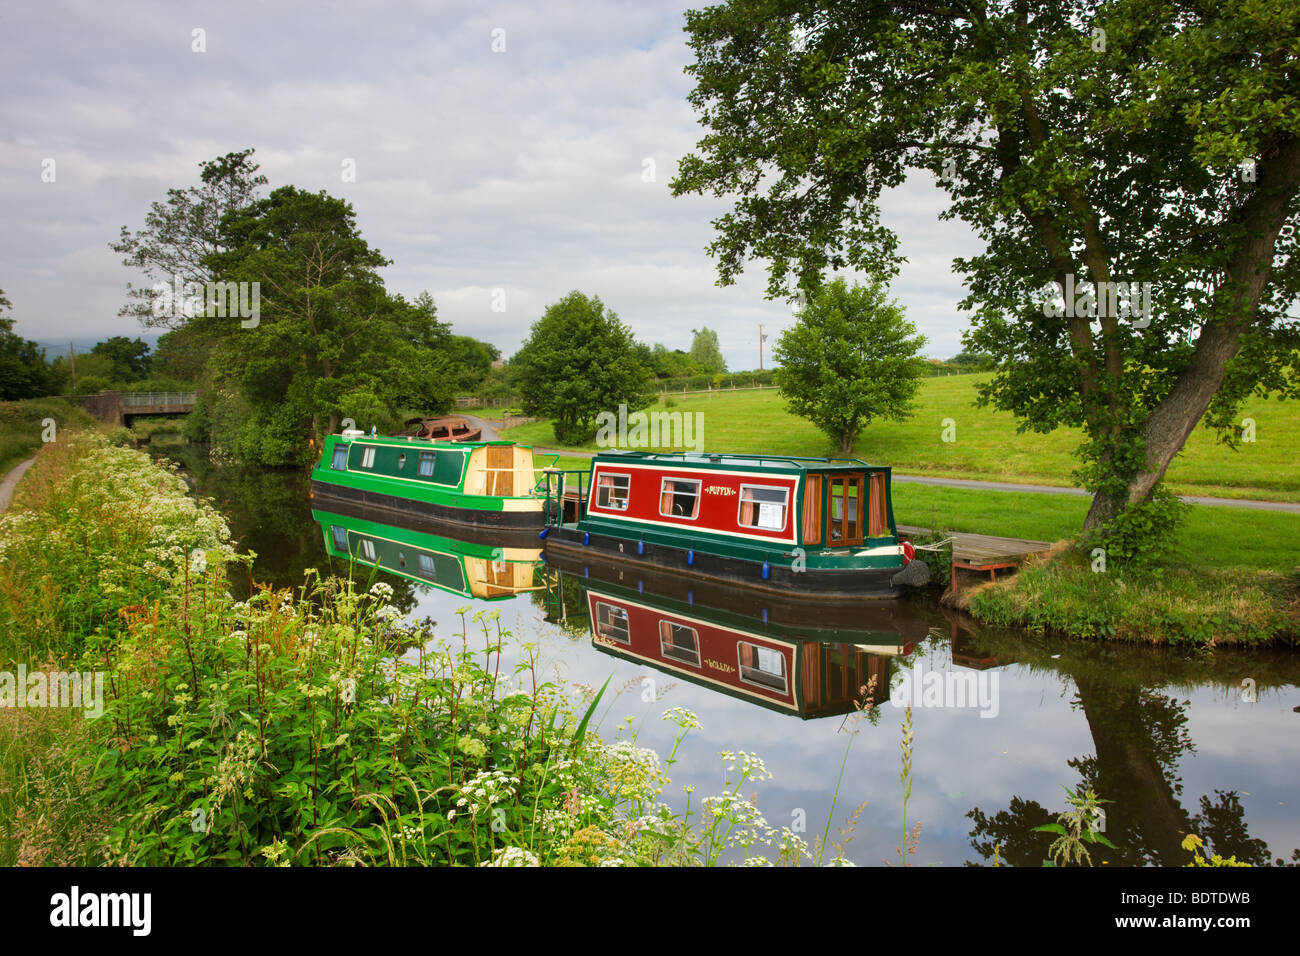 Narrowboats on the Monmouthshire and Brecon Canal near Llanfrynach, Brecon Beacons National Park, Powys, Wales, UK Stock Photo